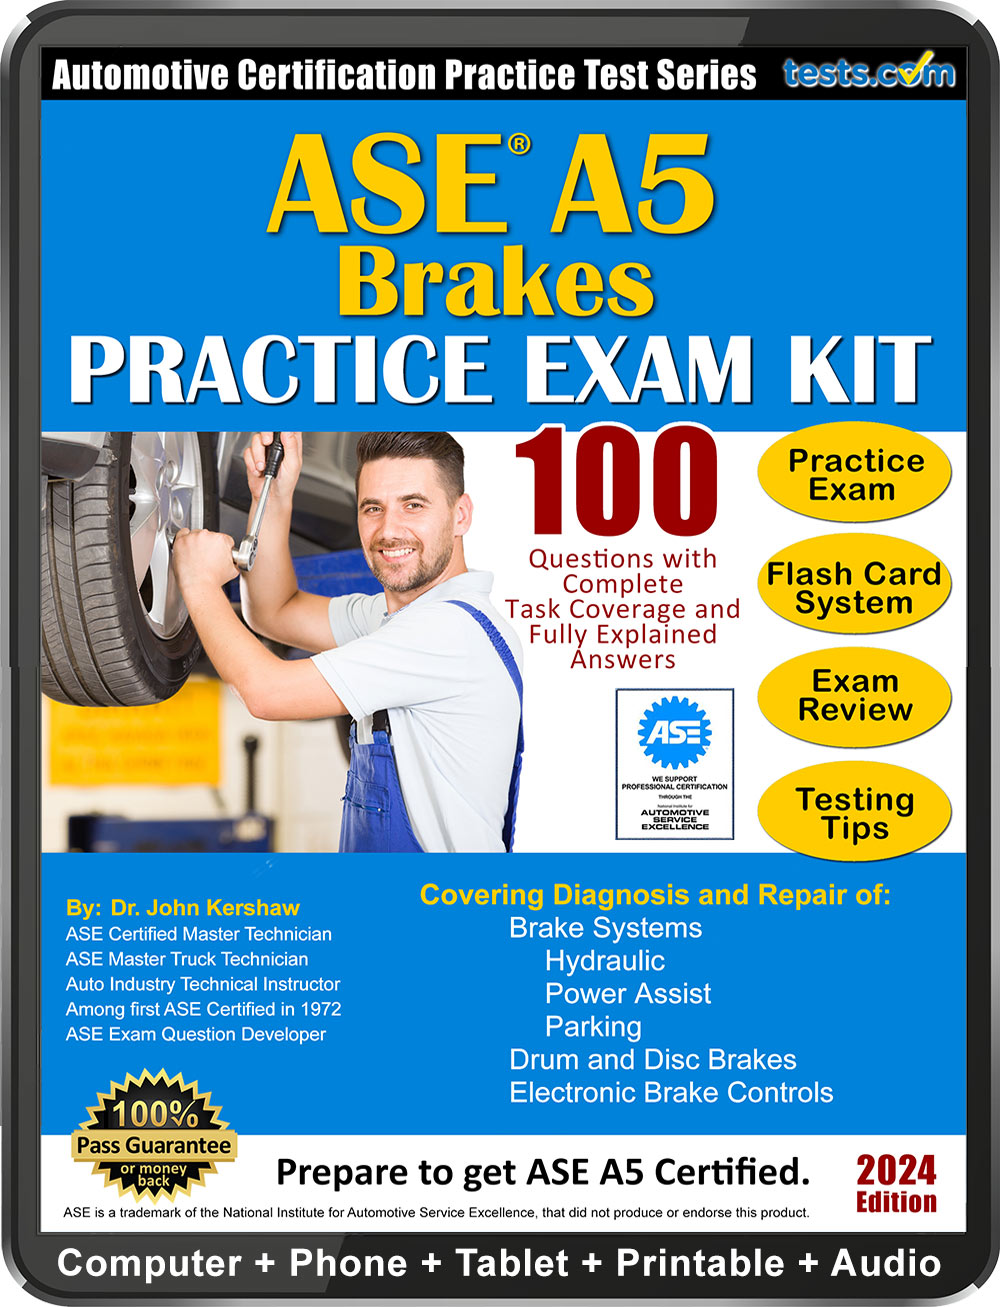 ASE A5 Practice Test